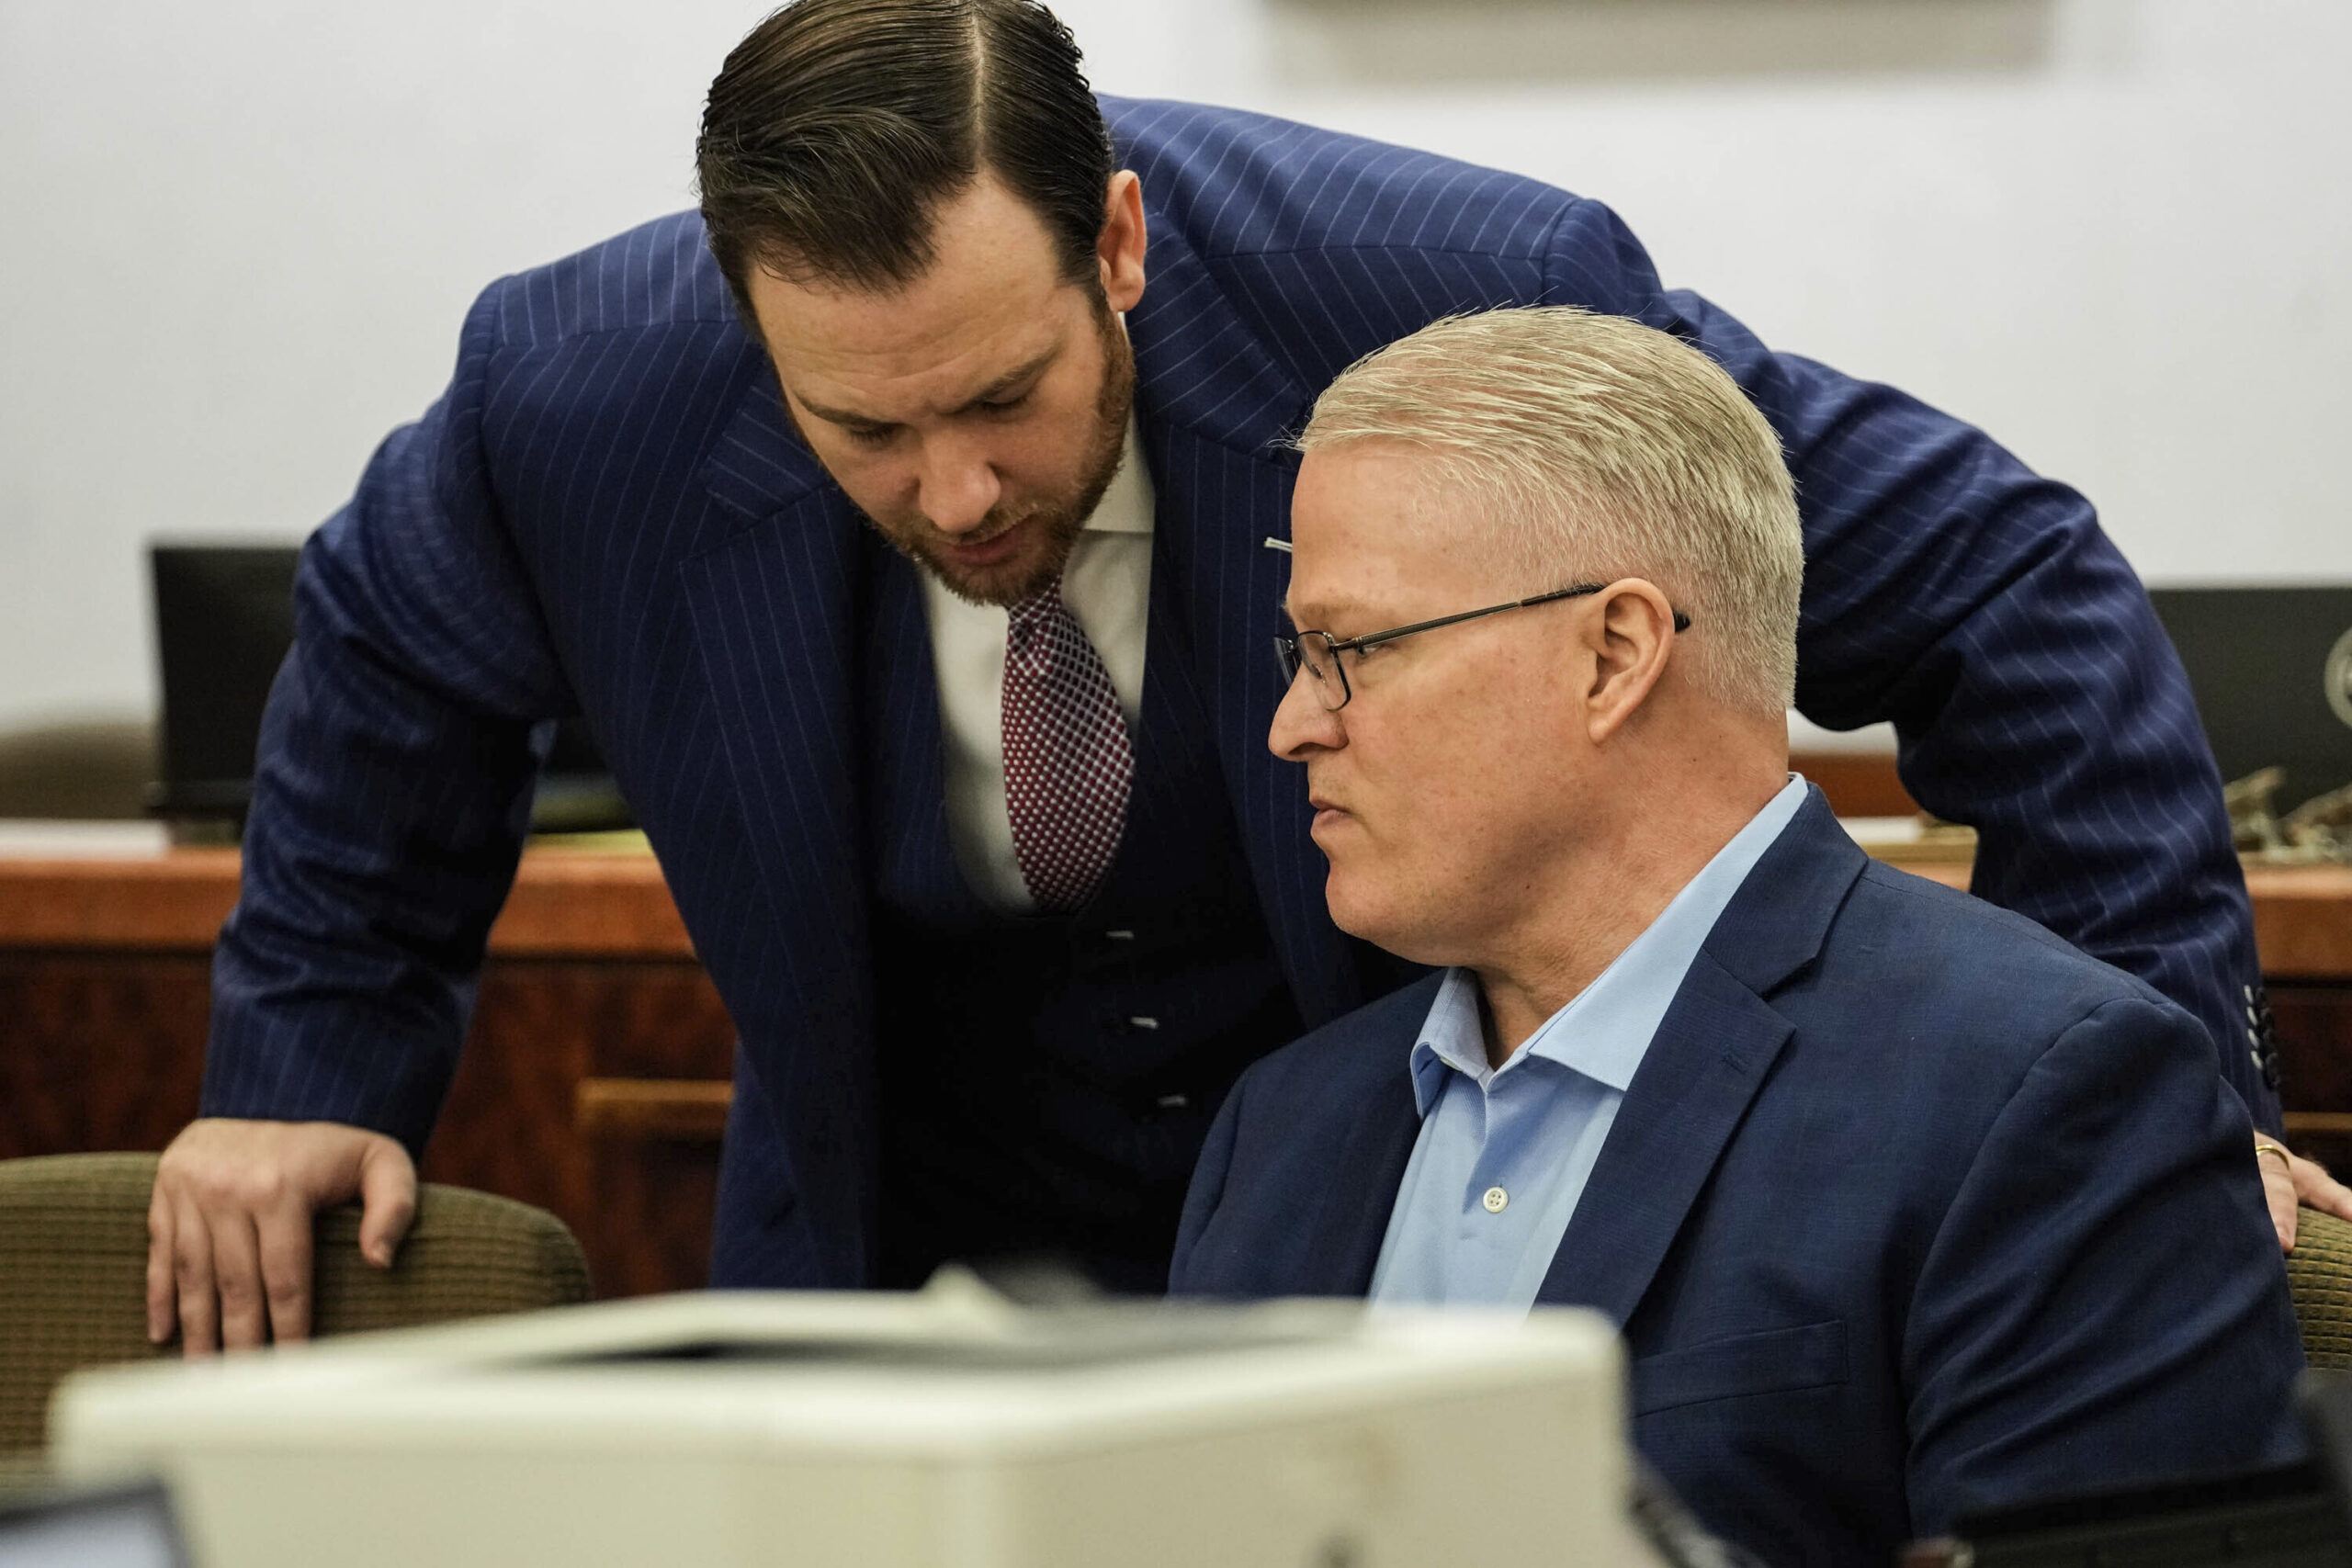 Defense attorney Romy Kaplan, left, speaks to client David Temple during his sentencing trial in th...